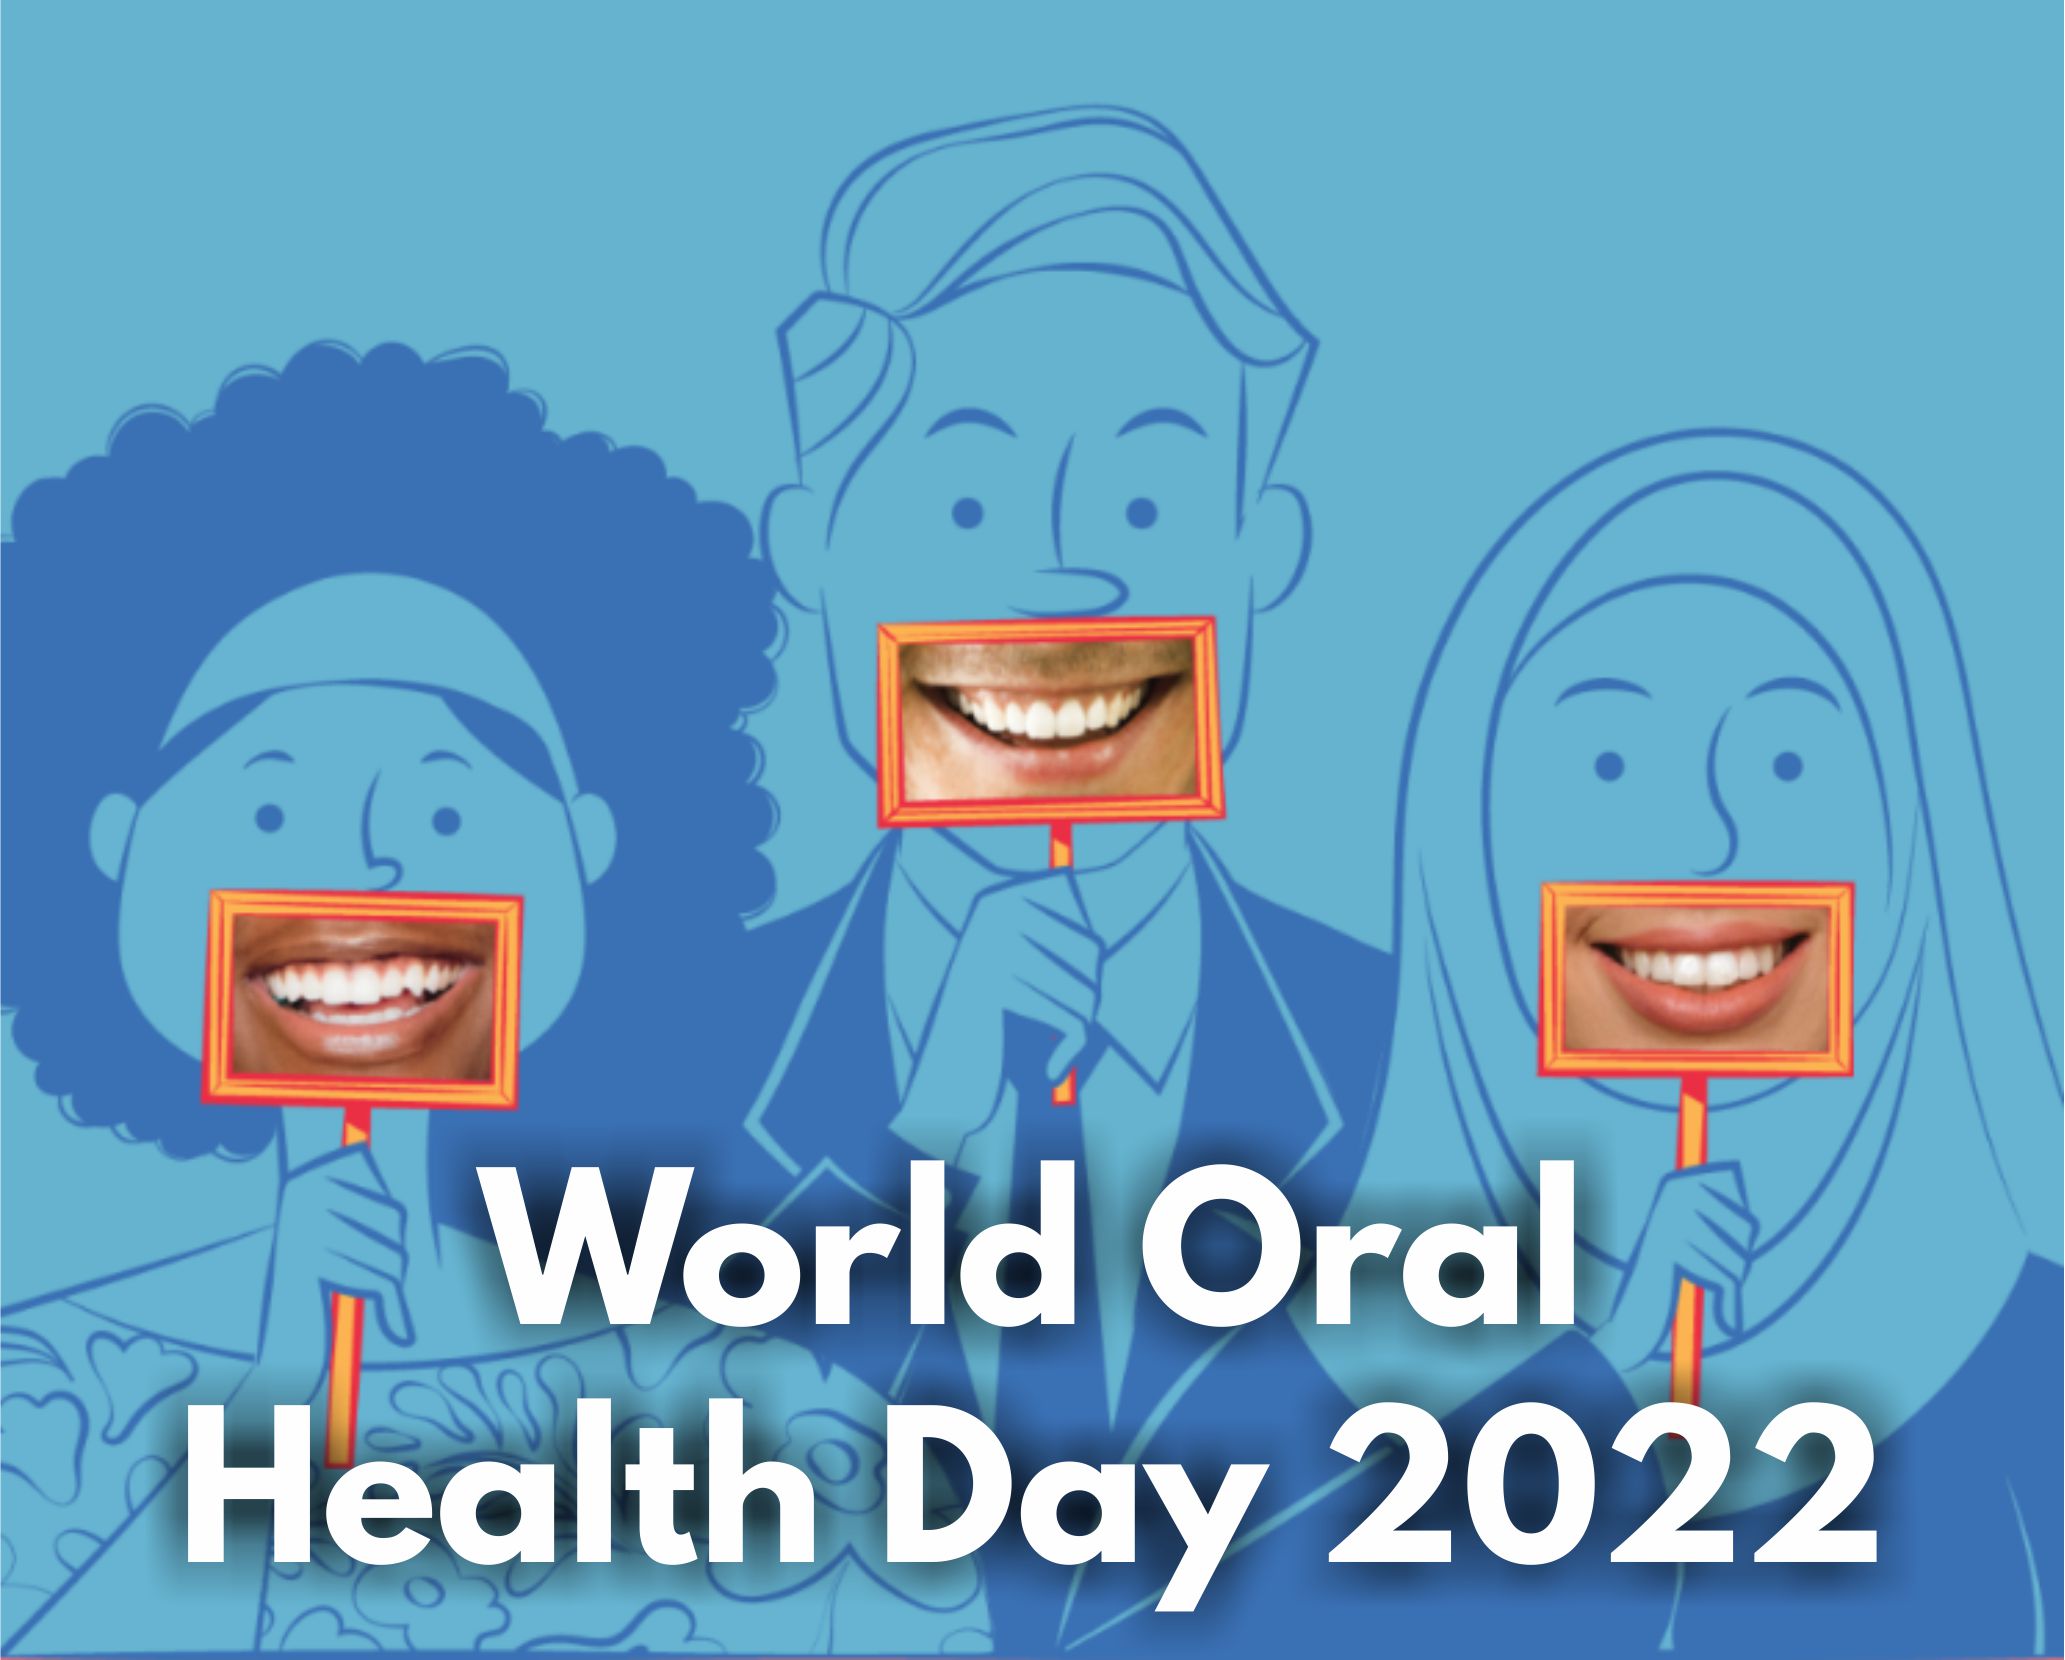 WORLD ORAL HEALTH DAY 2022 –  Theme & Significance